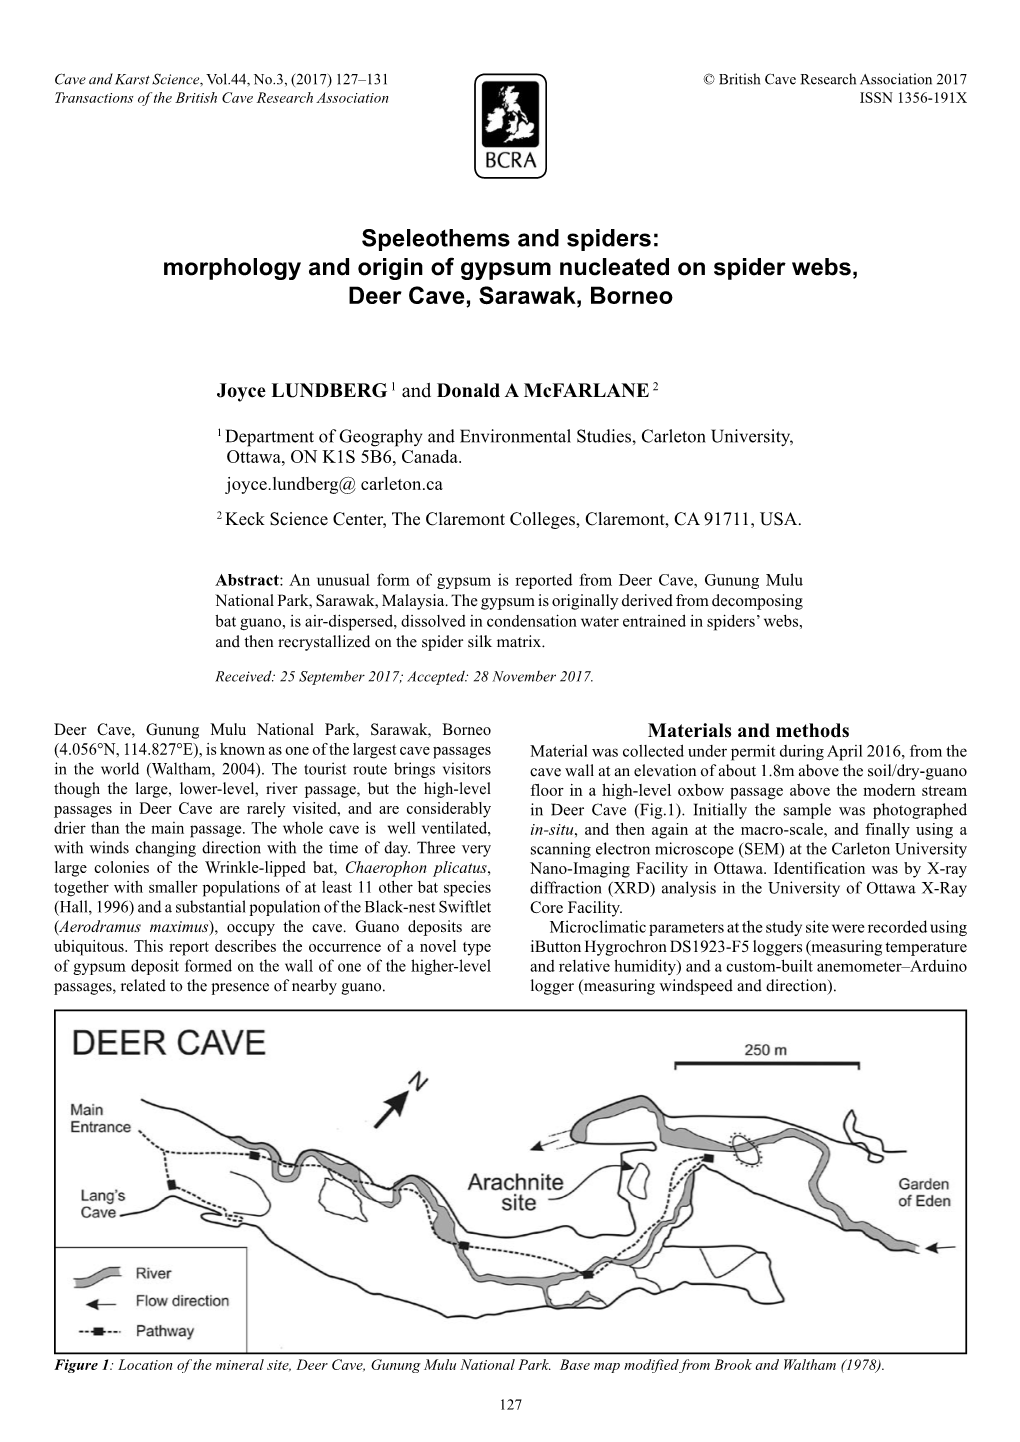 Morphology and Origin of Gypsum Nucleated on Spider Webs, Deer Cave, Sarawak, Borneo